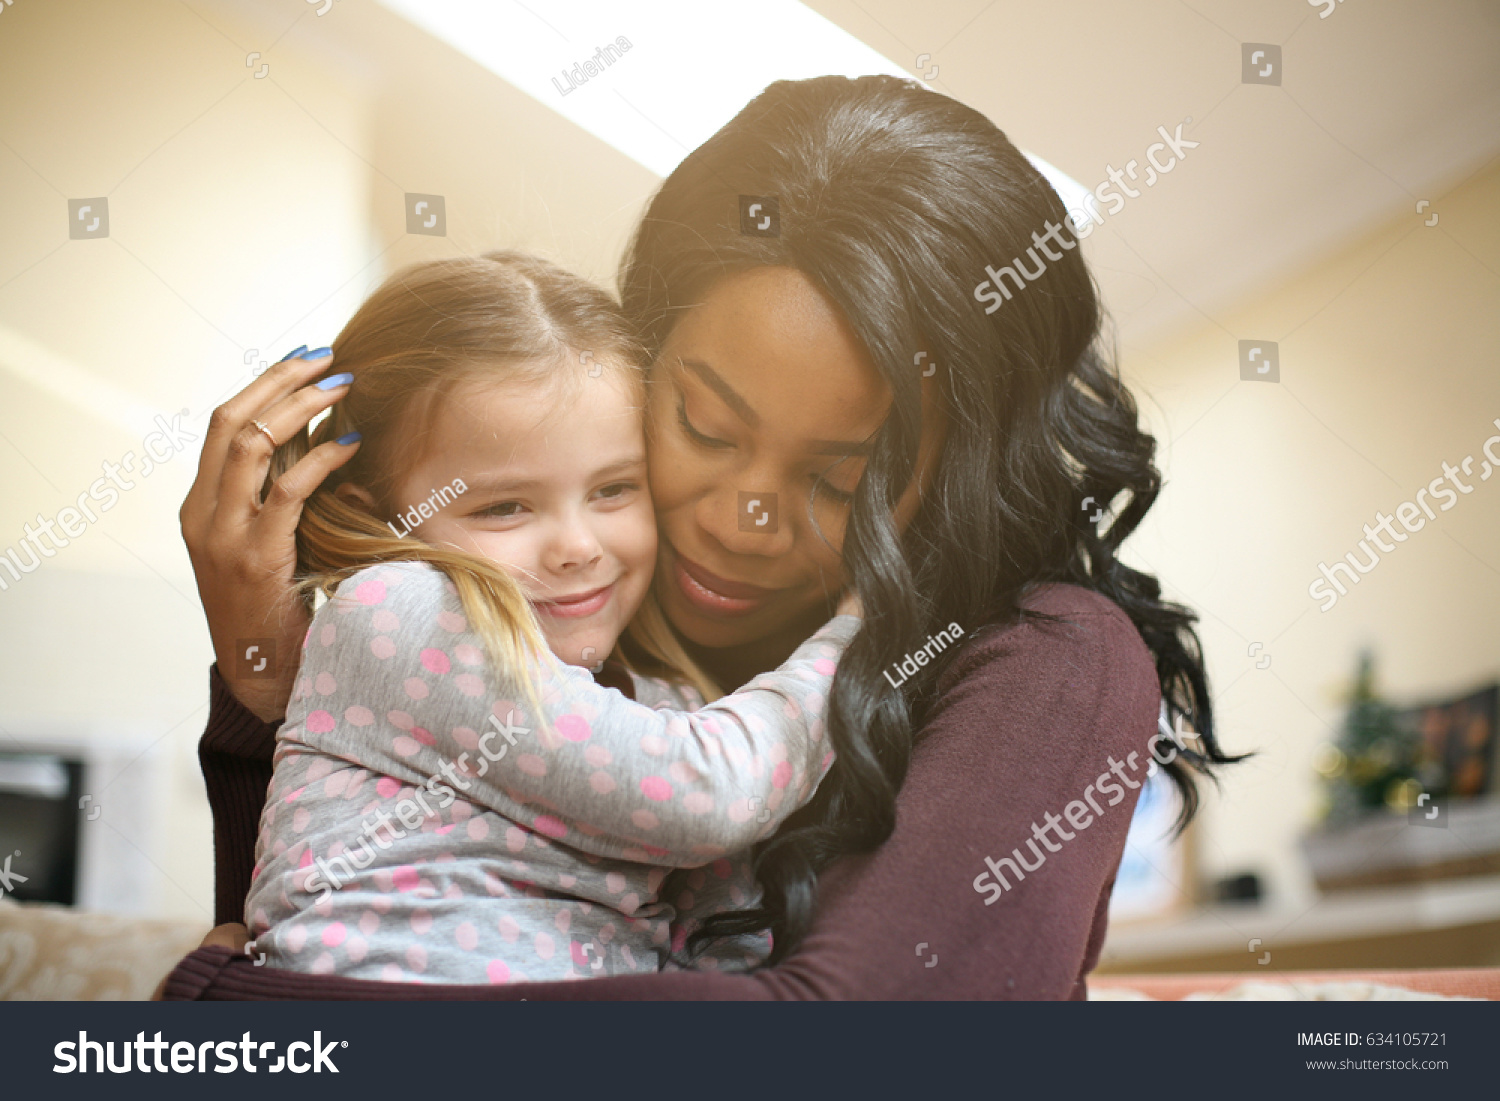 African American woman playing with girl. Woman hugging her adopted daughter.
 #634105721